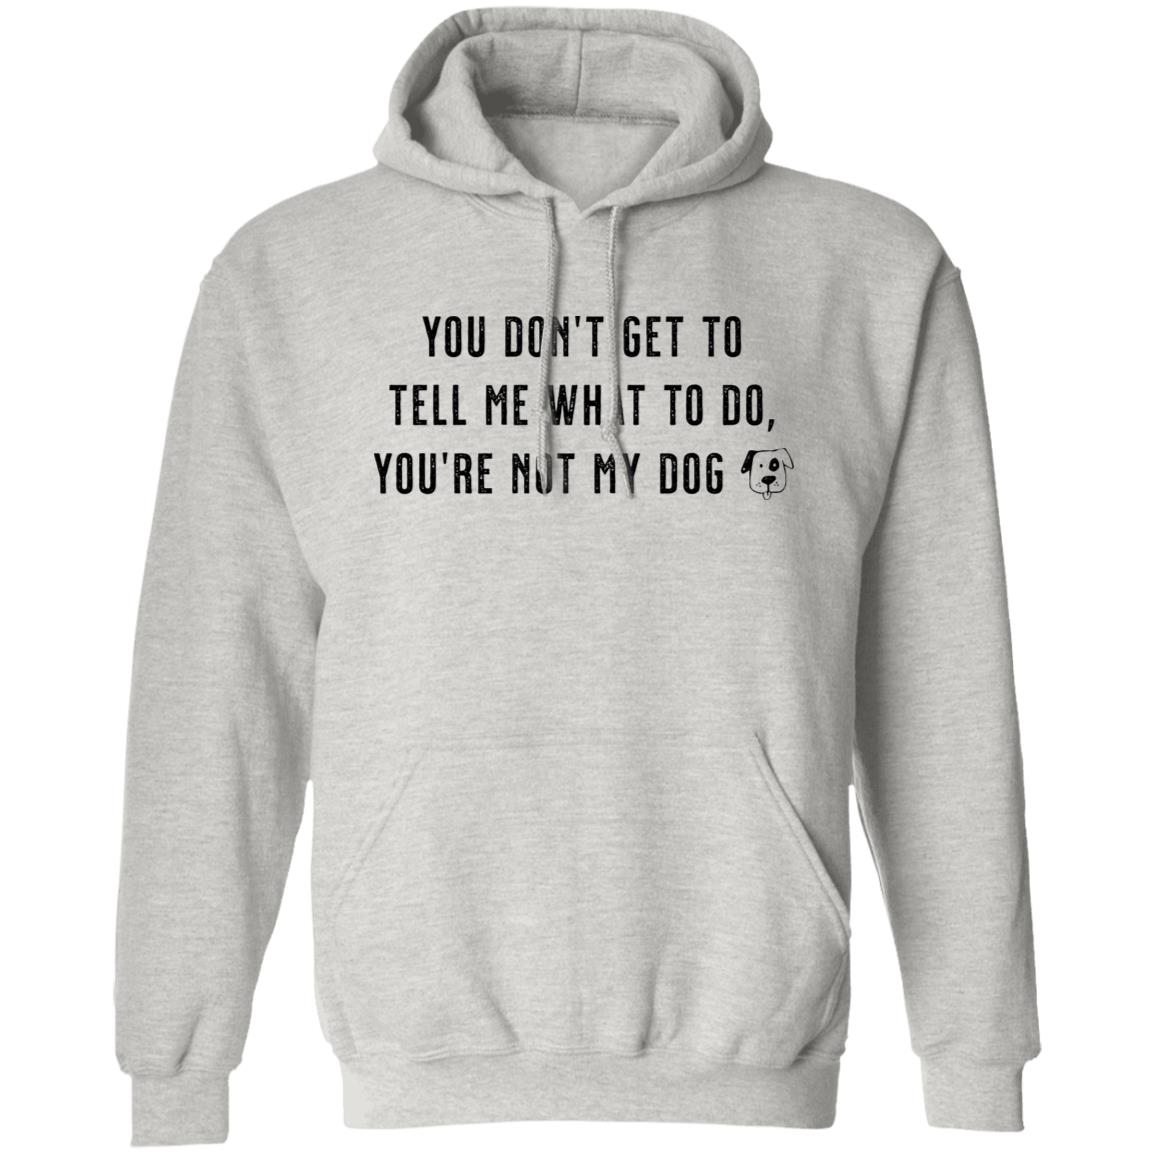 You Don’t Get To Tell Me What To Do Grey Pullover Hoodie